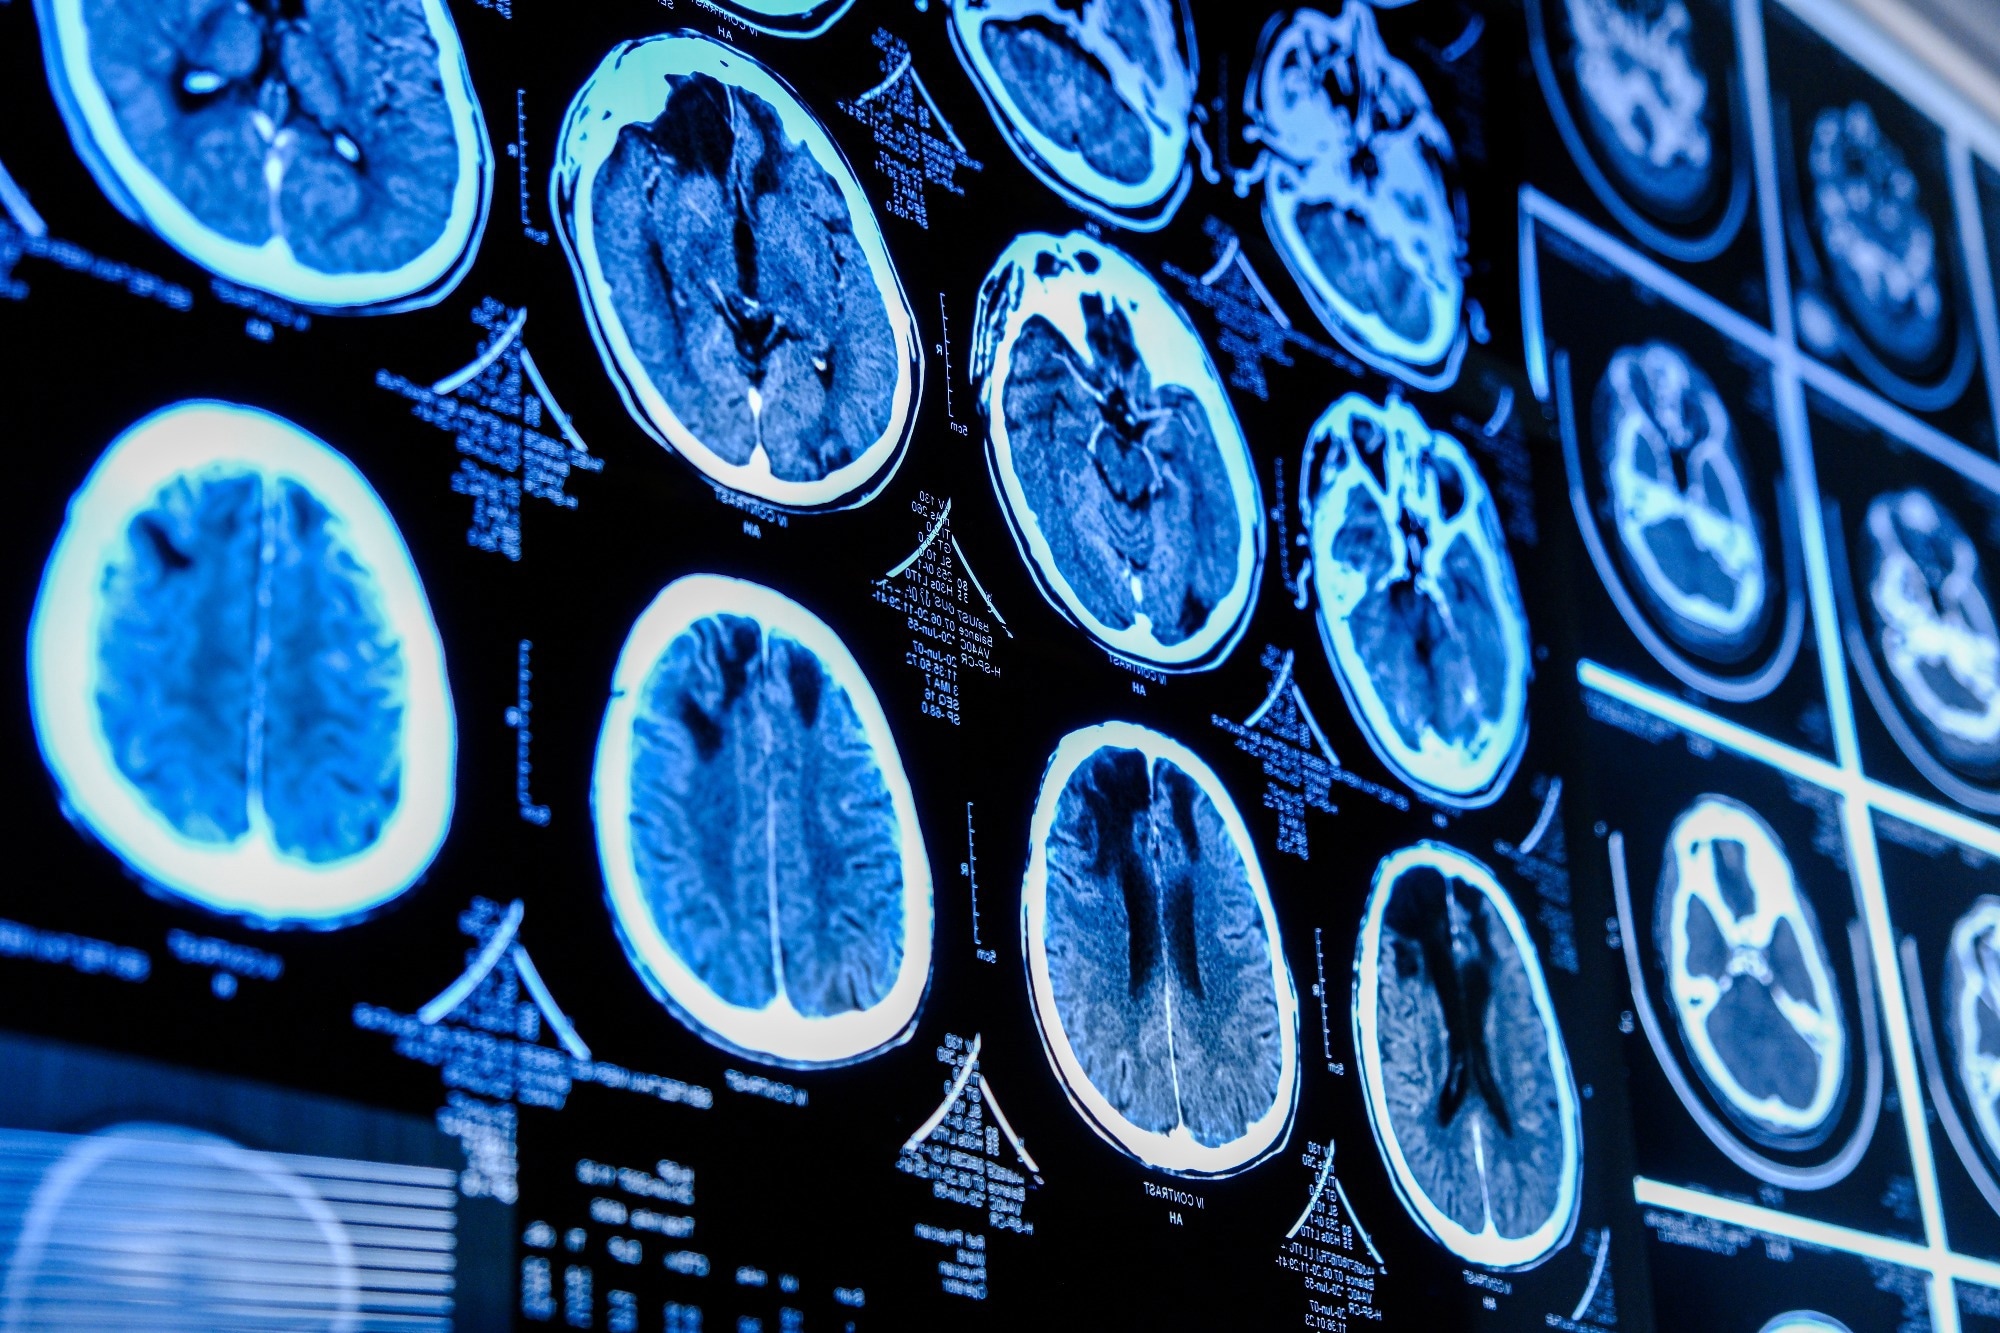 Study: Microstructural brain tissue changes contribute to cognitive and mood deficits in adults with type 2 diabetes mellitus. Image Credit: Elif Bayraktar / Shutterstock.com